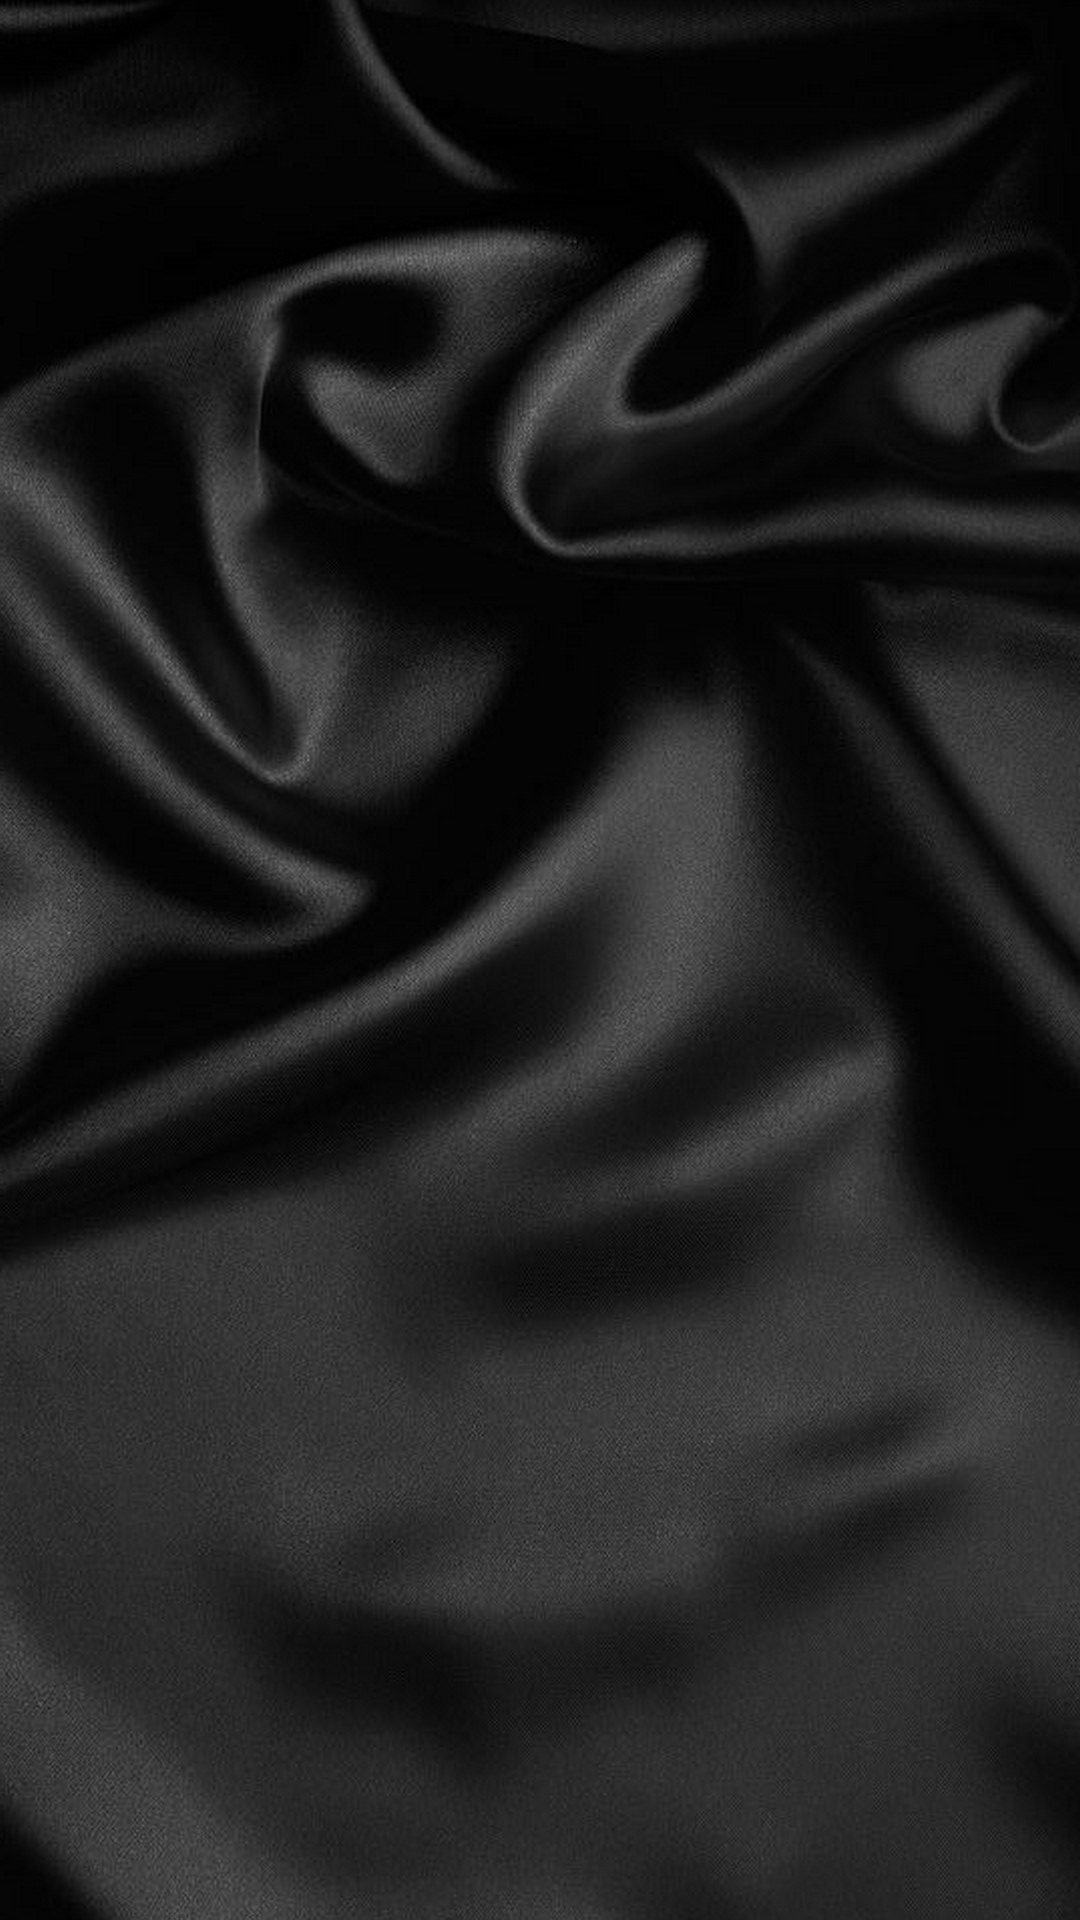 Wallpaper Black Silk for iPhone With high-resolution 1920X1080 pixel. You can use this wallpaper for your iPhone 5, 6, 7, 8, X, XS, XR backgrounds, Mobile Screensaver, or iPad Lock Screen